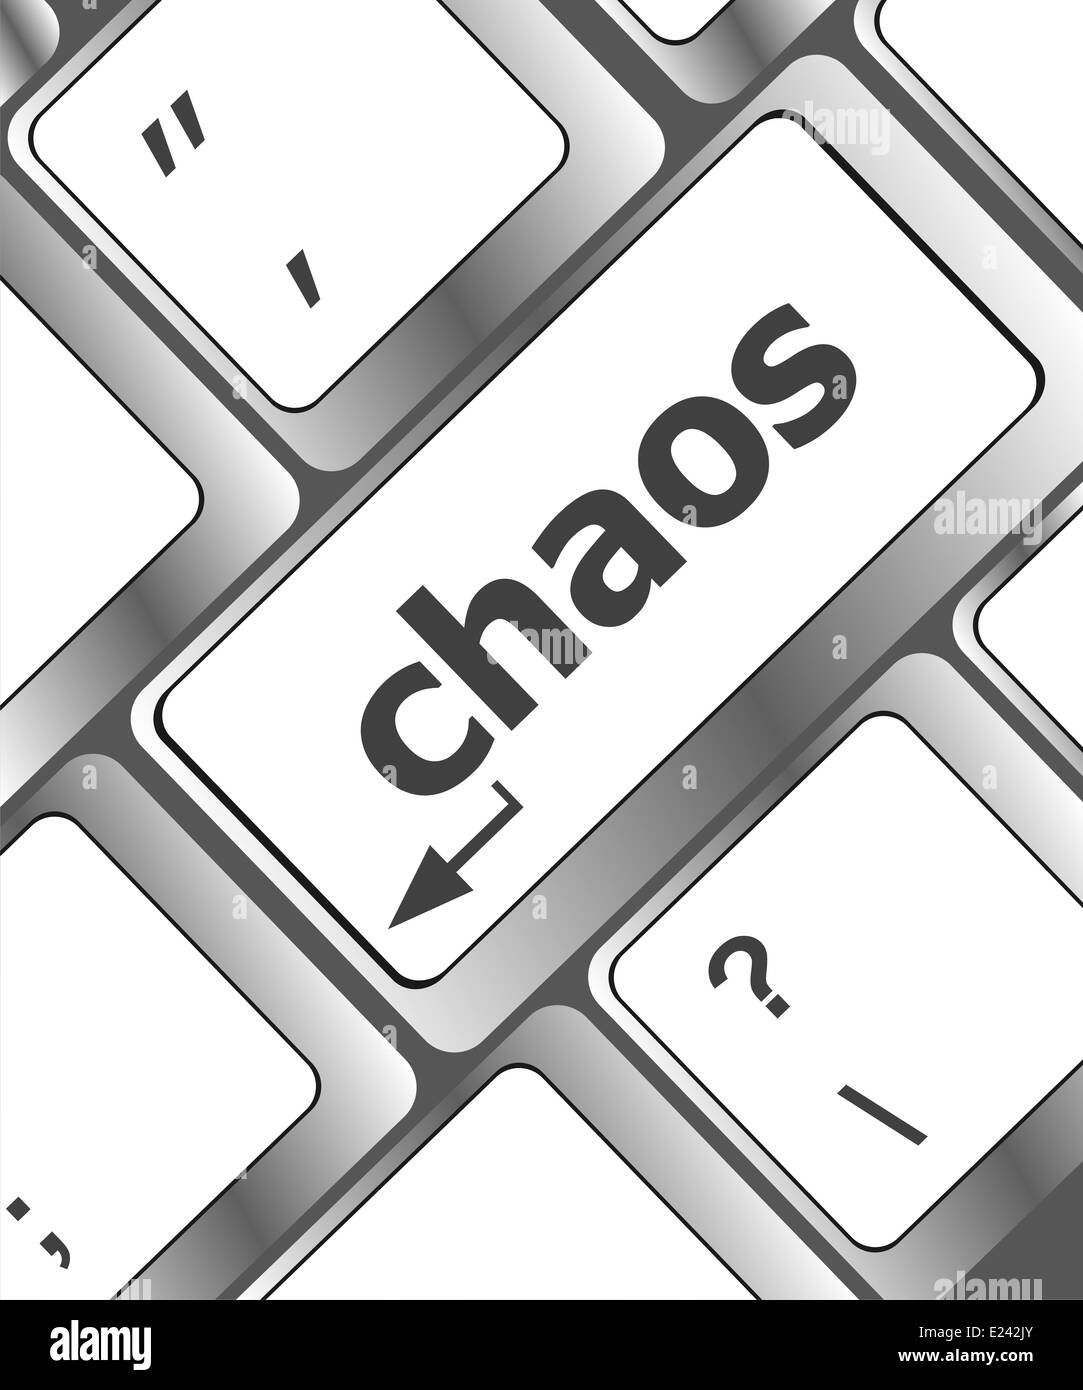 chaos keys on computer keyboard, business concept Stock Photo